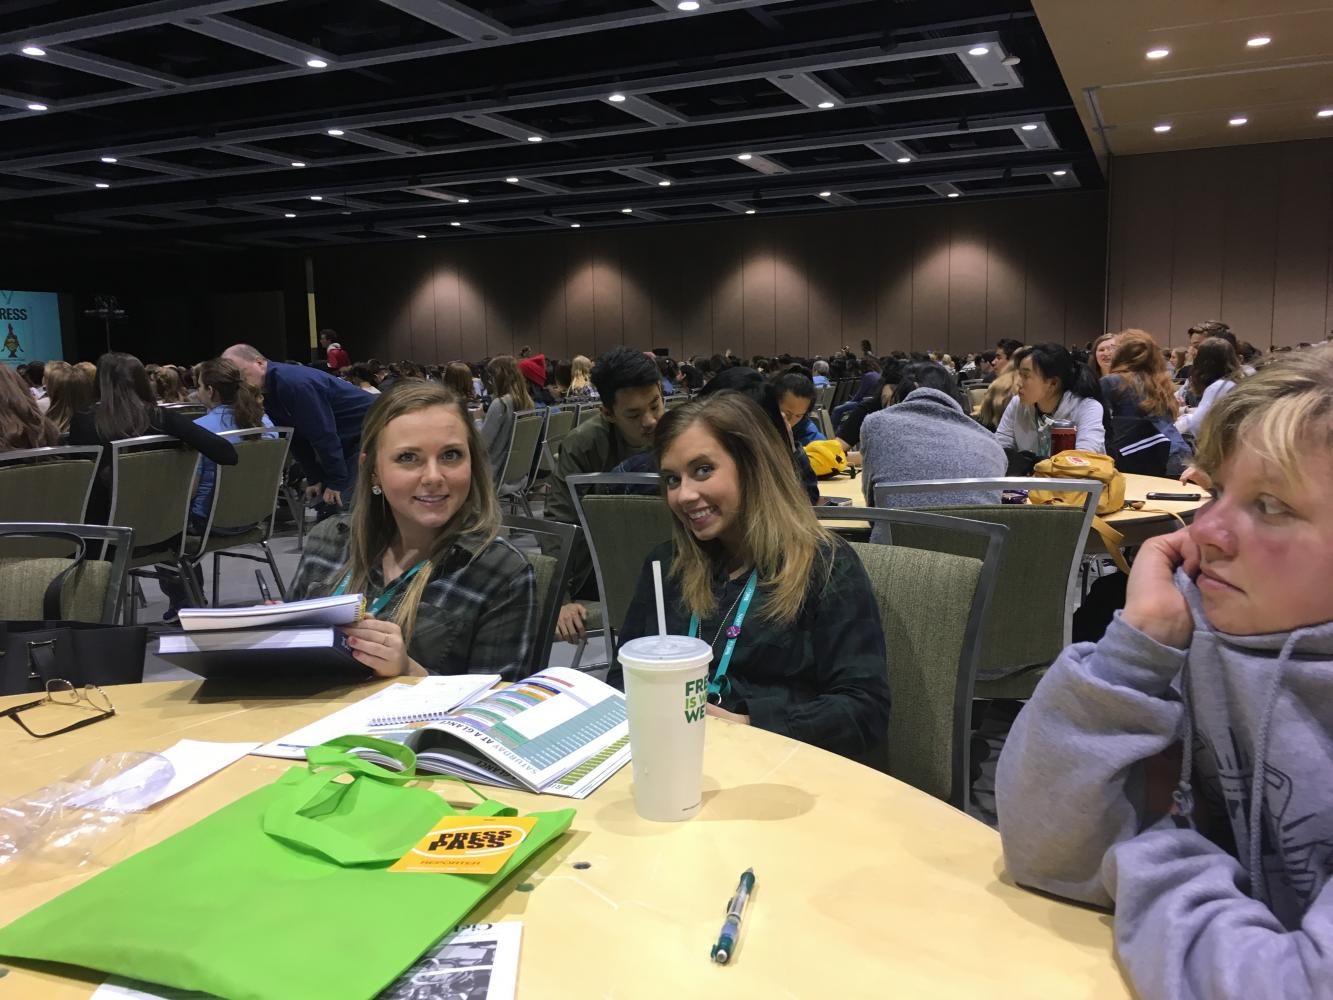 Publication members Alexis Ringoen, senior, and Ellie Aldrich, junior, working hard at the Seattle Journalism Convention. “I learned how to create a stronger and more positive classroom,” said Aldrich. Photo Submitted